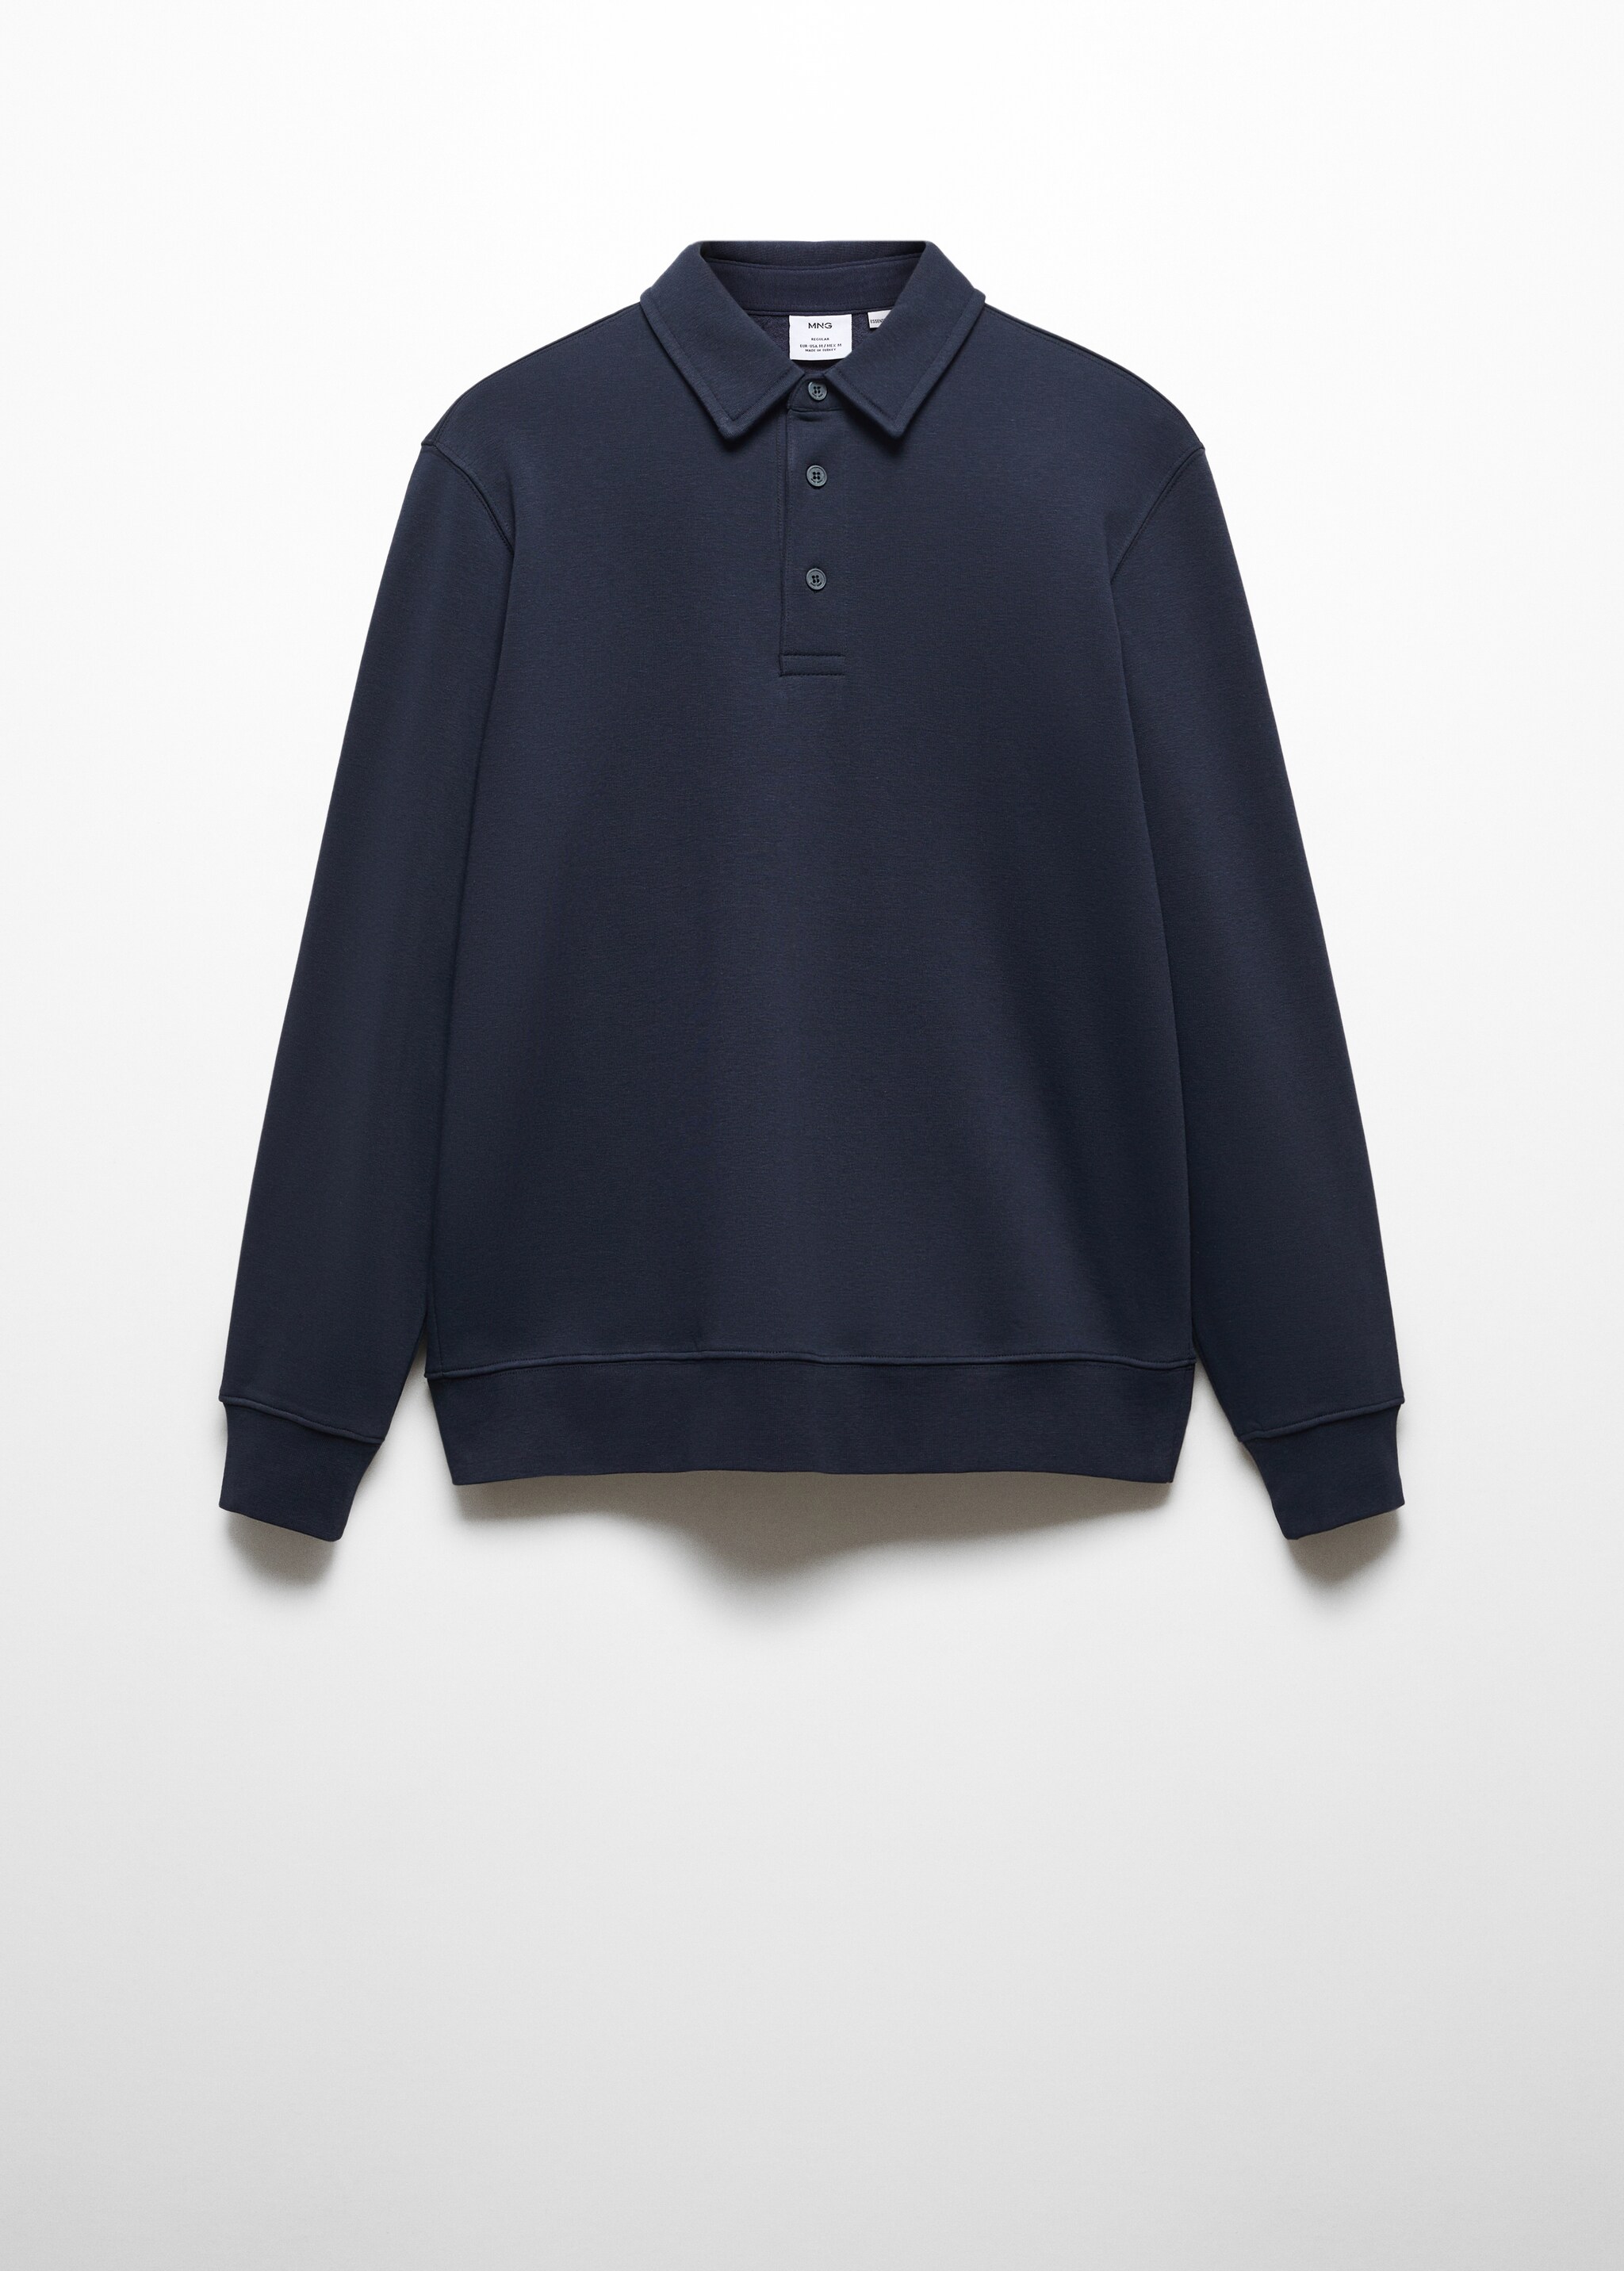 Cotton polo sweatshirt - Article without model